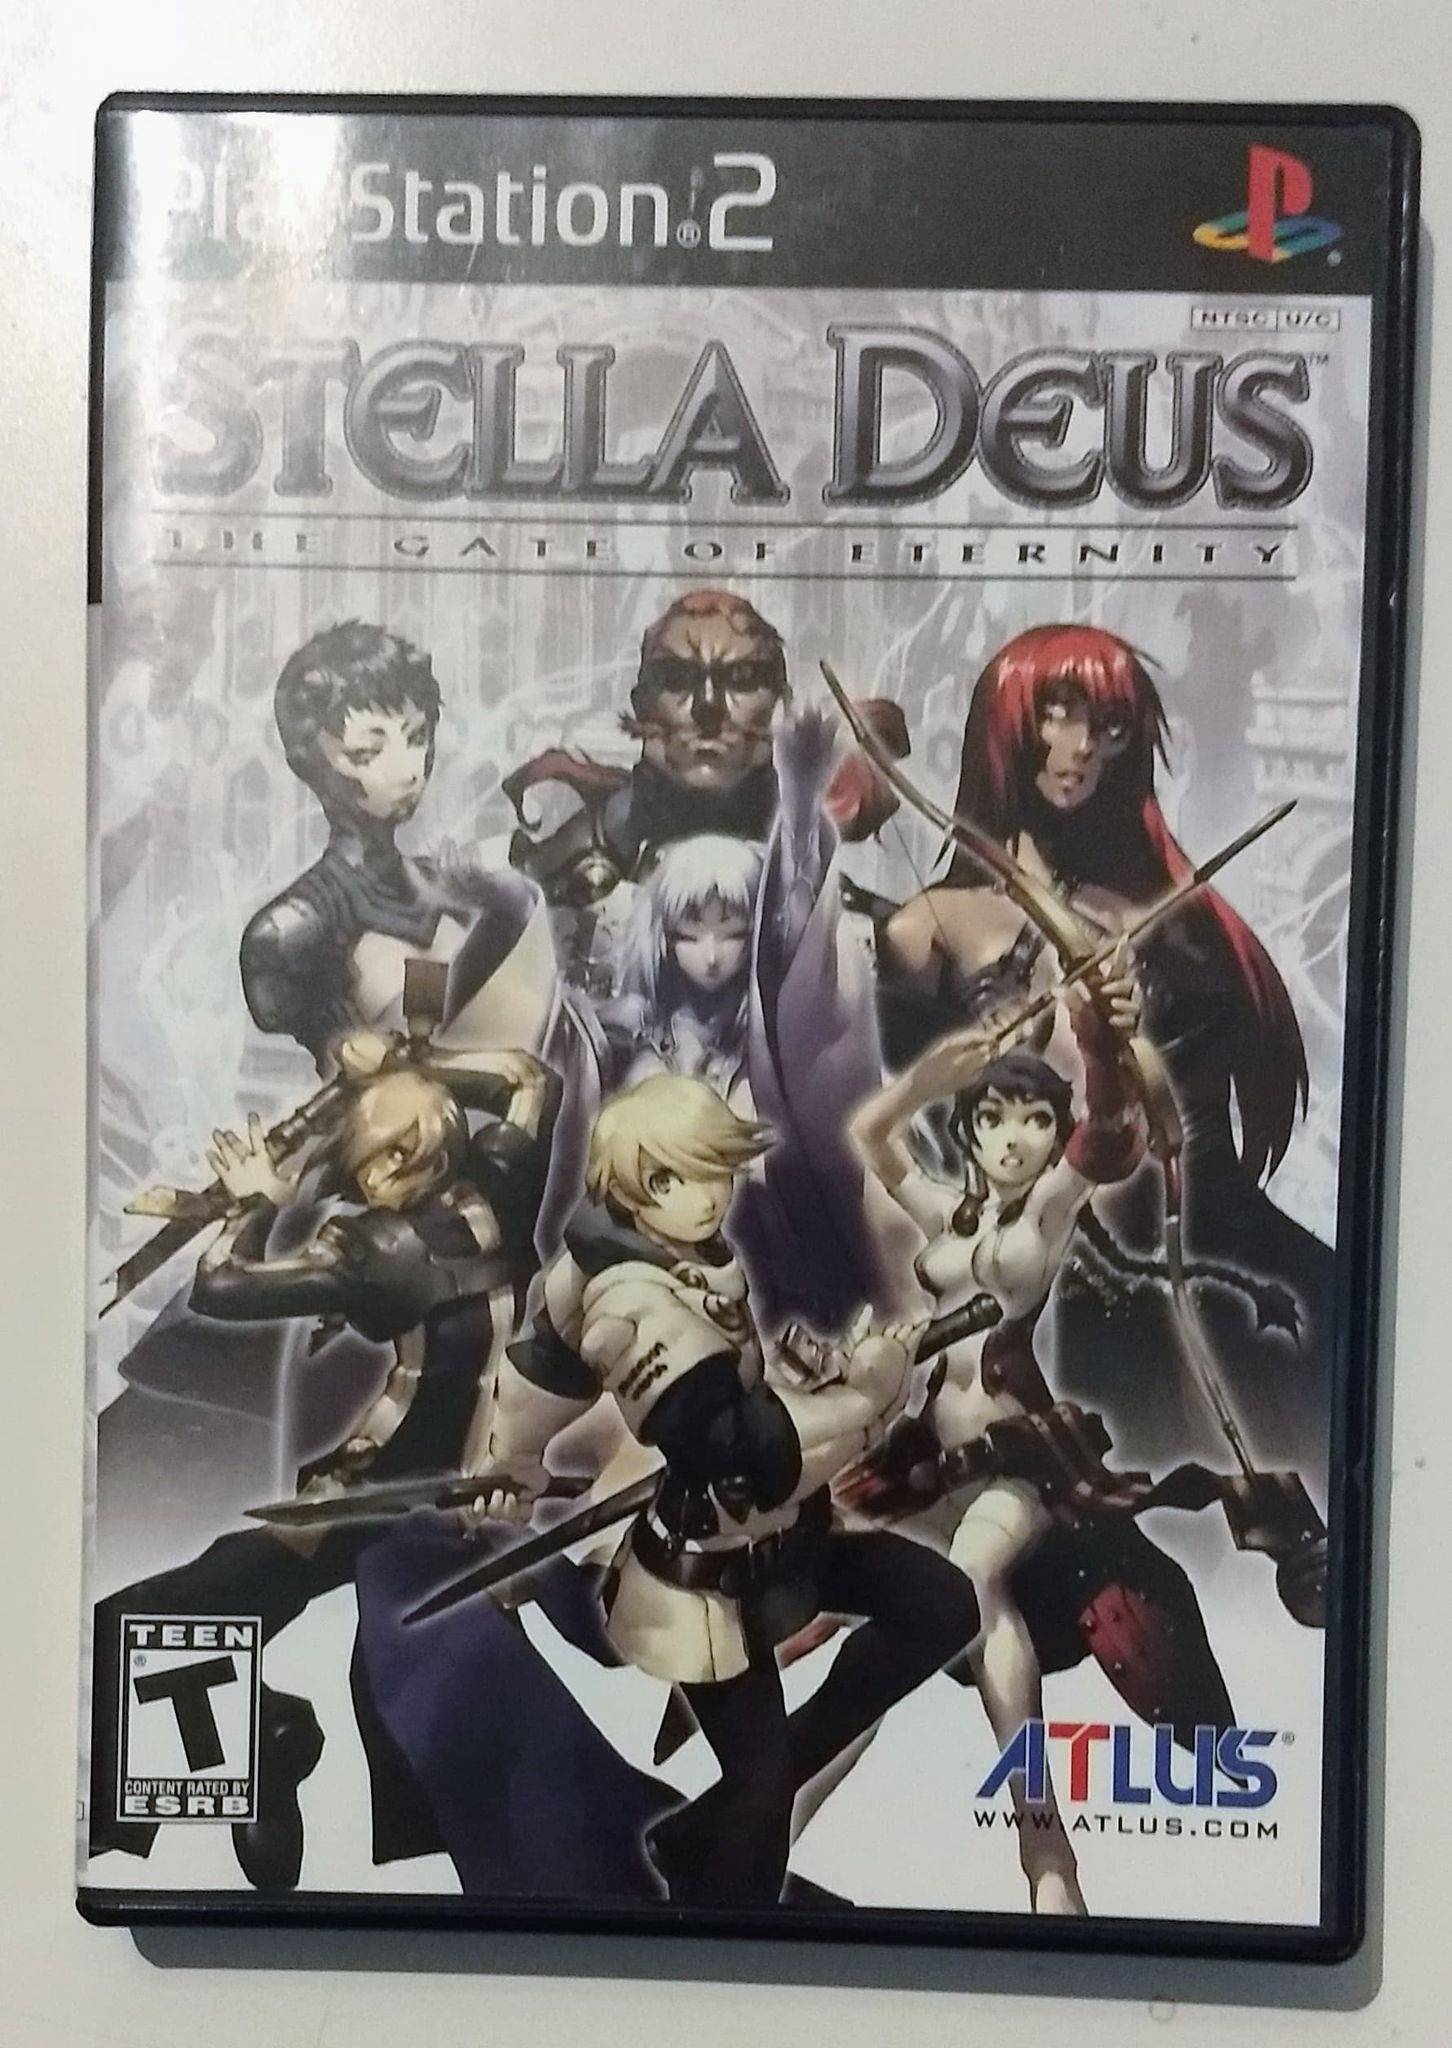 STELLA DEUS: THE GATE OF ETERNITY (PLAYSTATION 2 PS2) - jeux video game-x